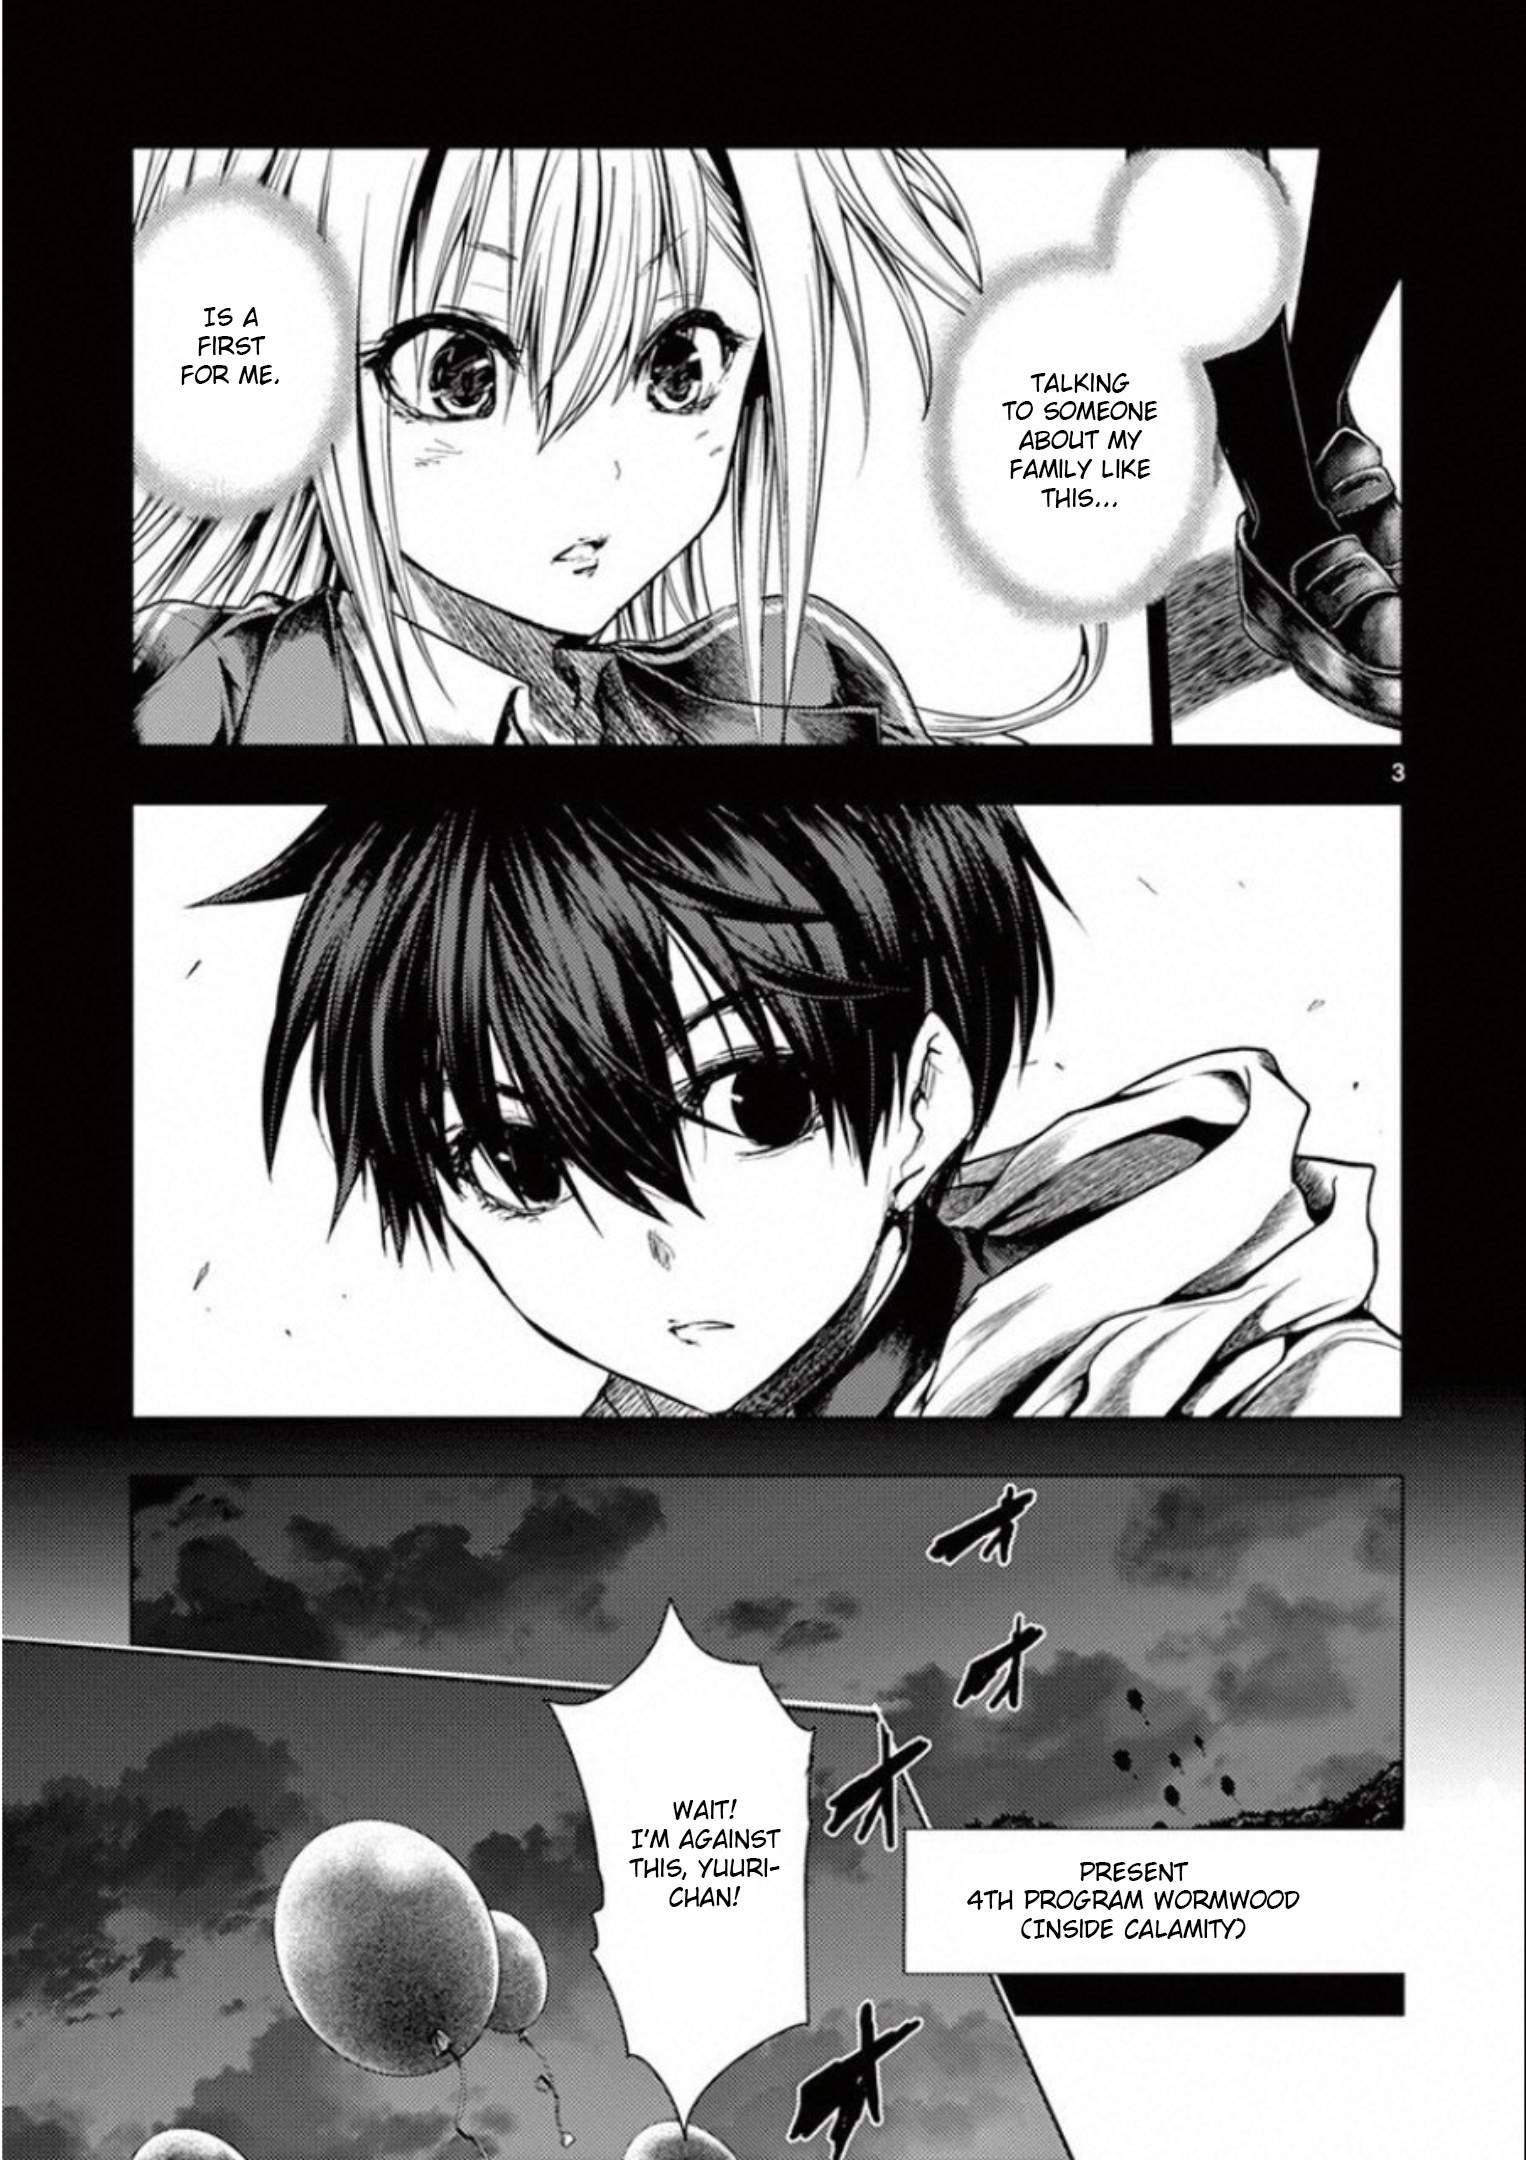 Start Fighting 5 Seconds After Meeting - chapter 104 - #3